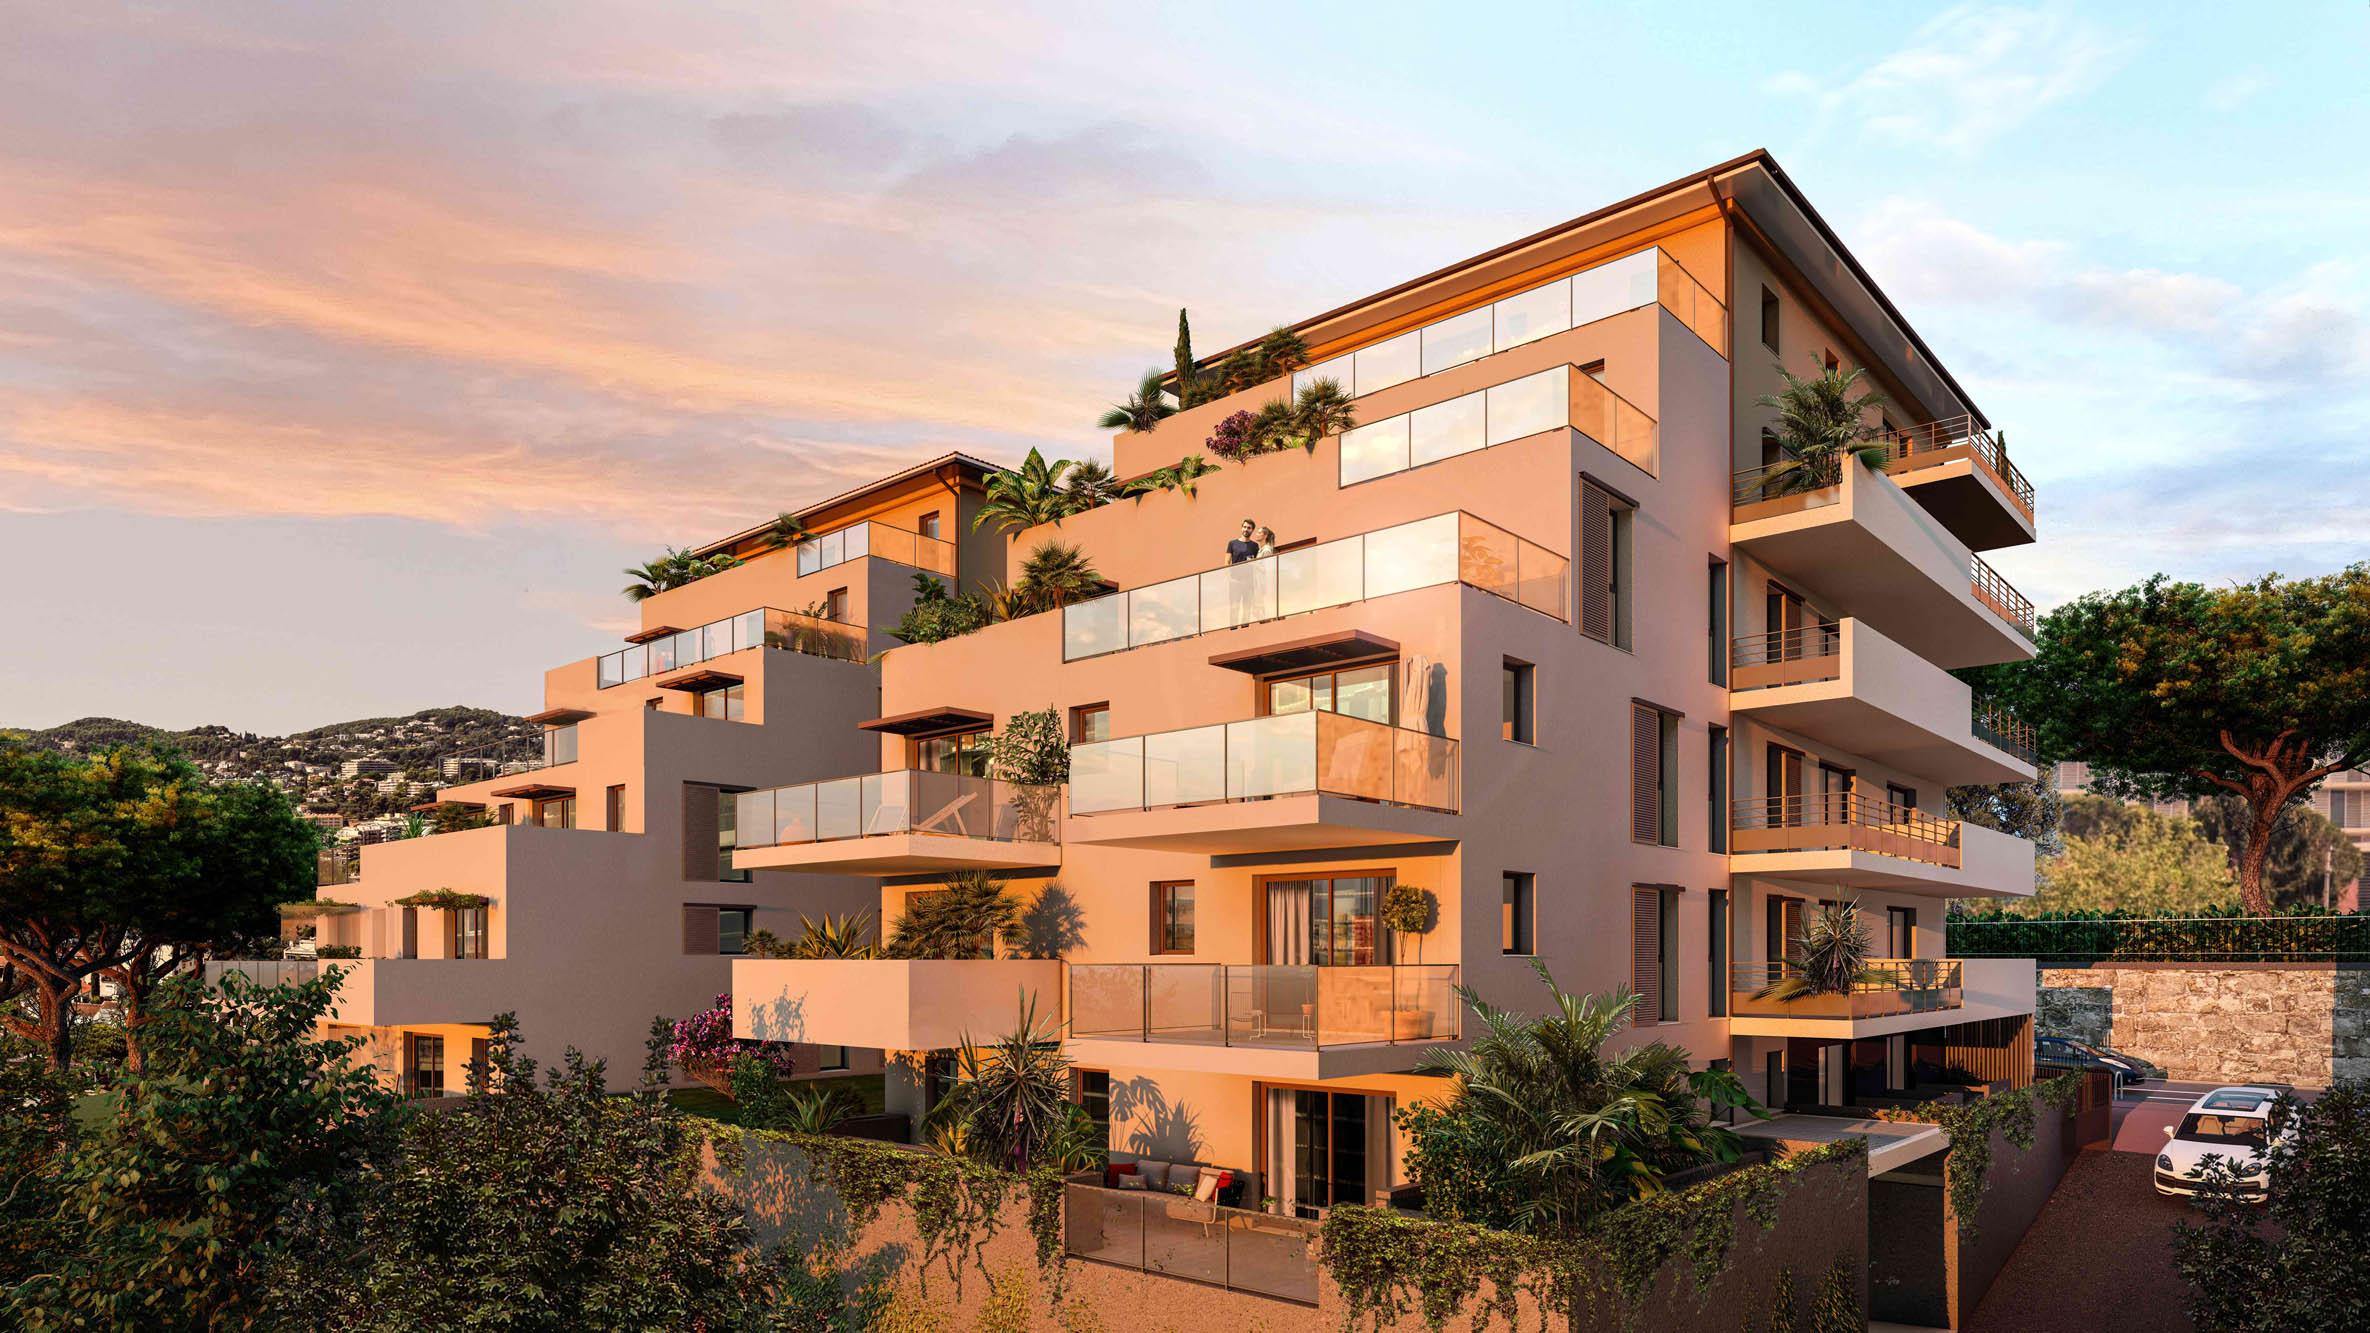 Programme immobilier neuf 06400 Cannes CAN-3064